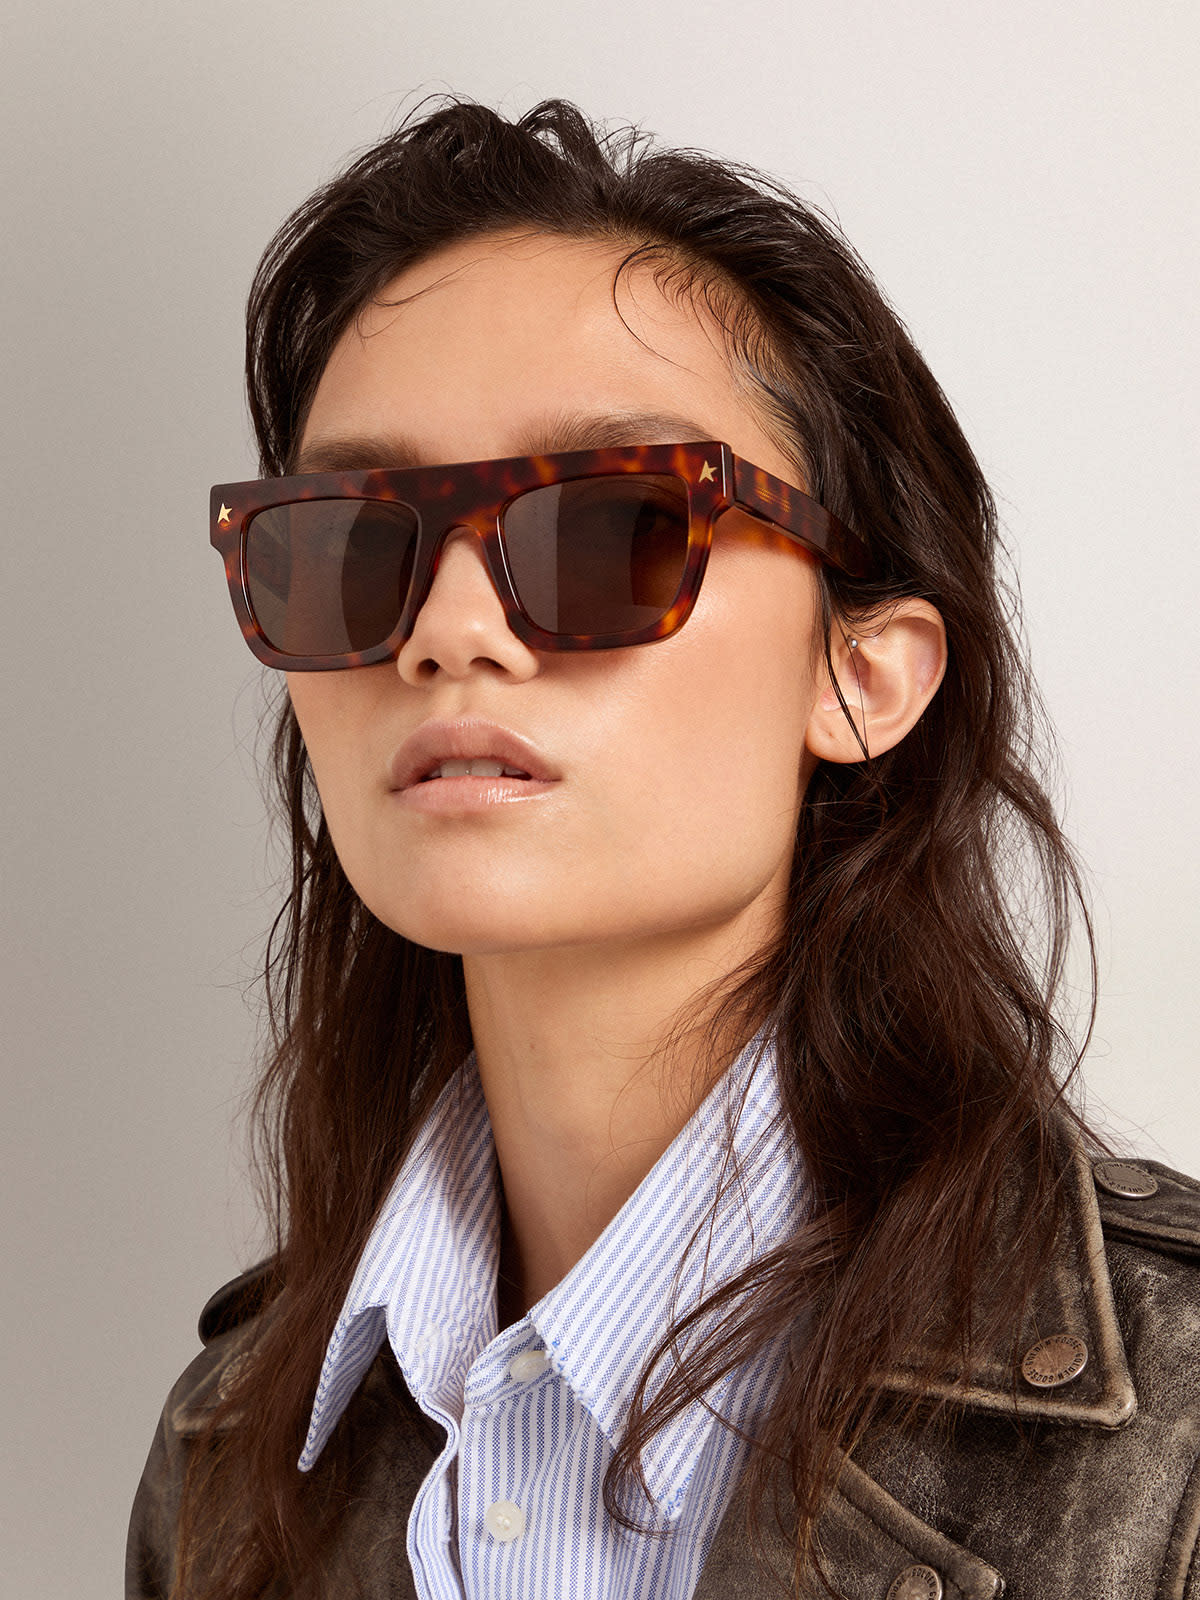 Golden Goose - Square-style Sunframe Jamie with Havana brown frame and gold details in 